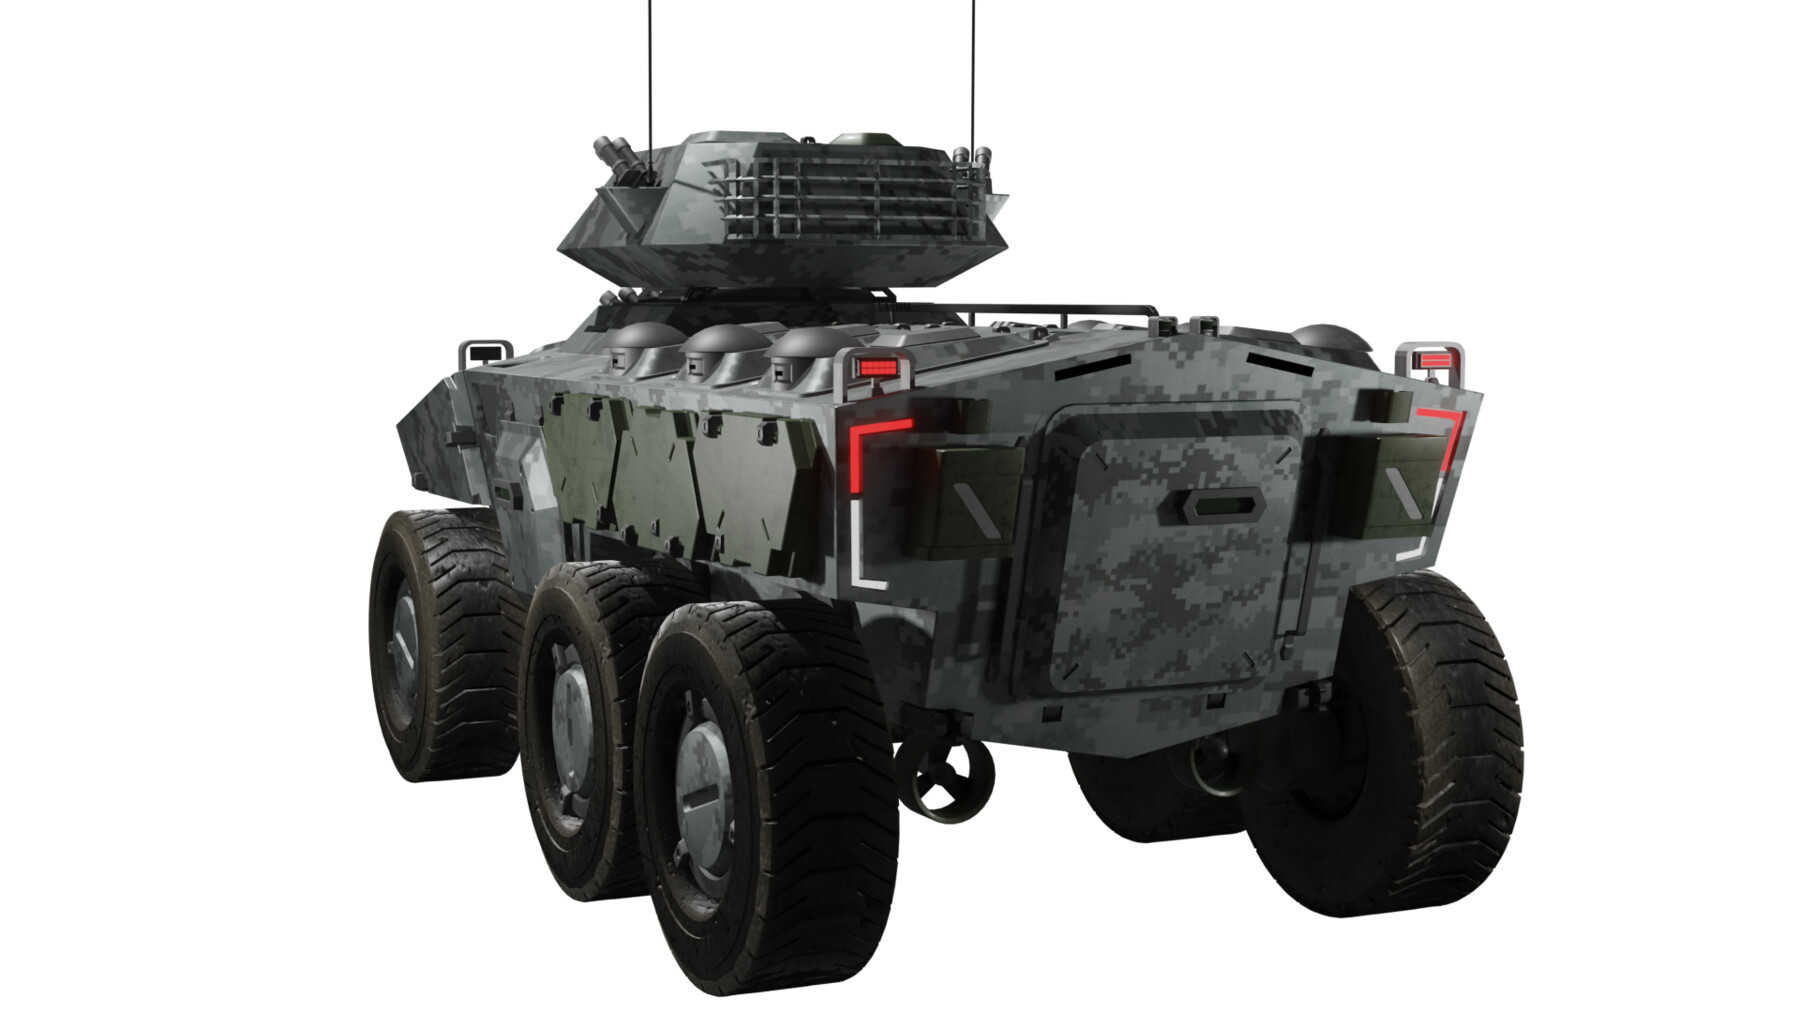 ArtStation - Sci-fi Armored personal carrier with turret | Resources